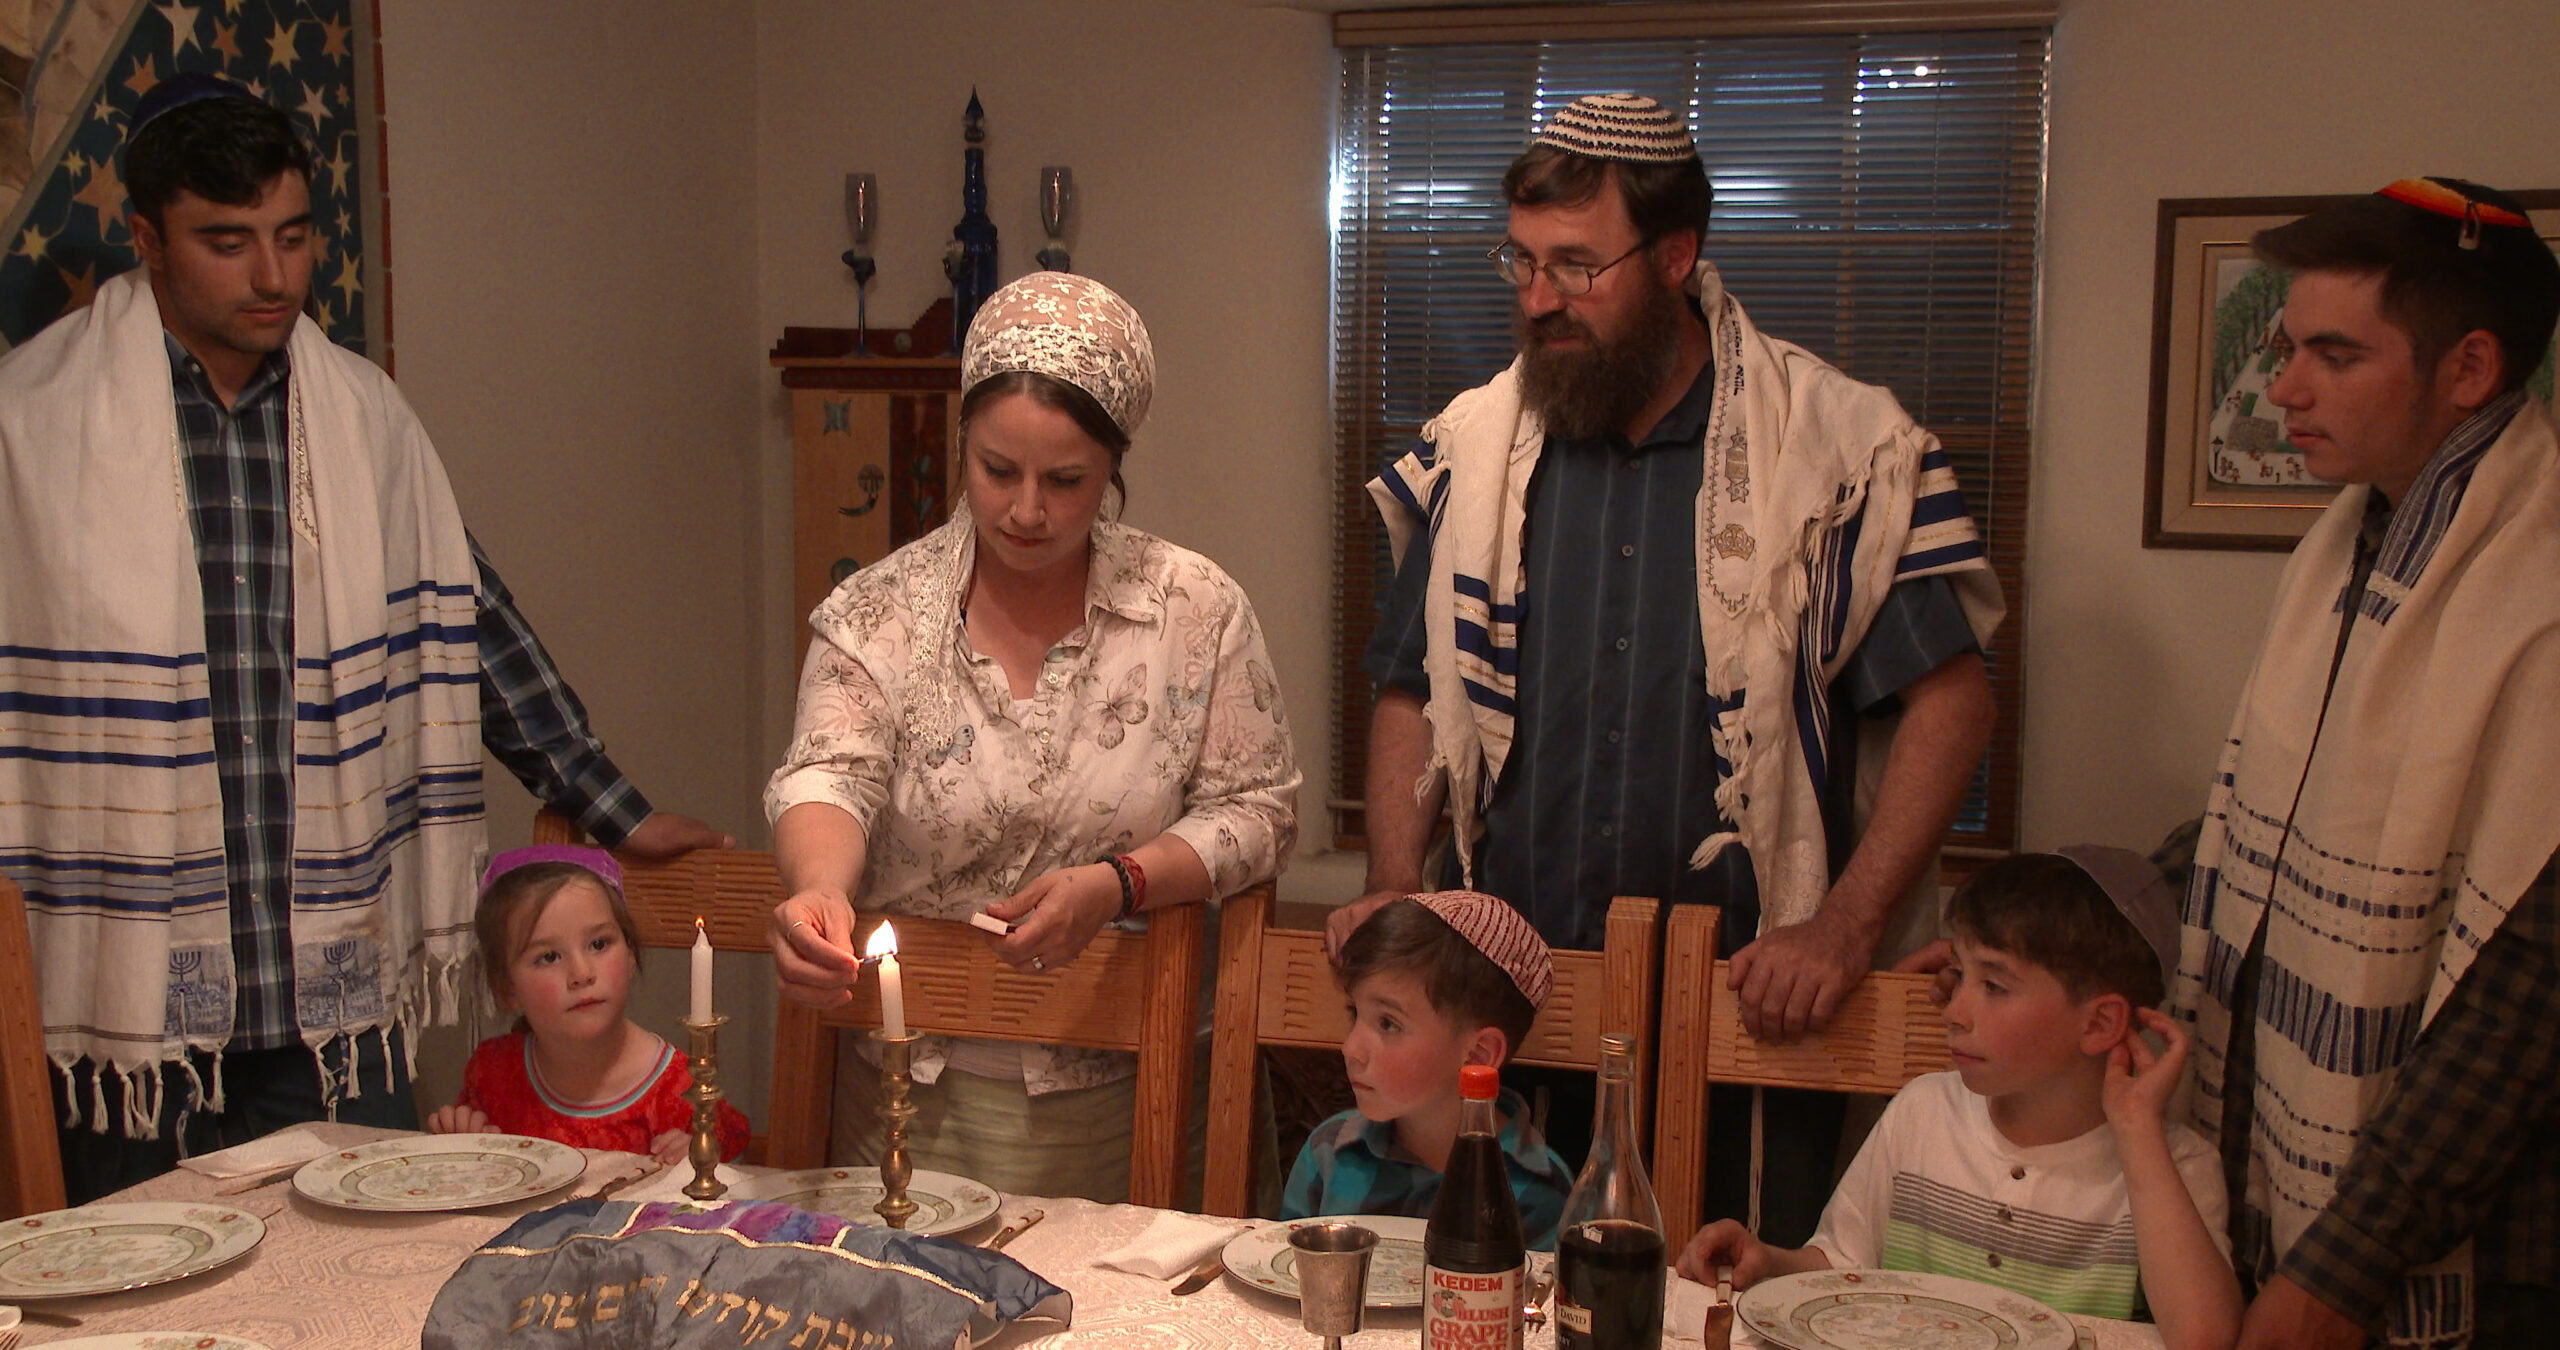 A Jewish family stands around a table.